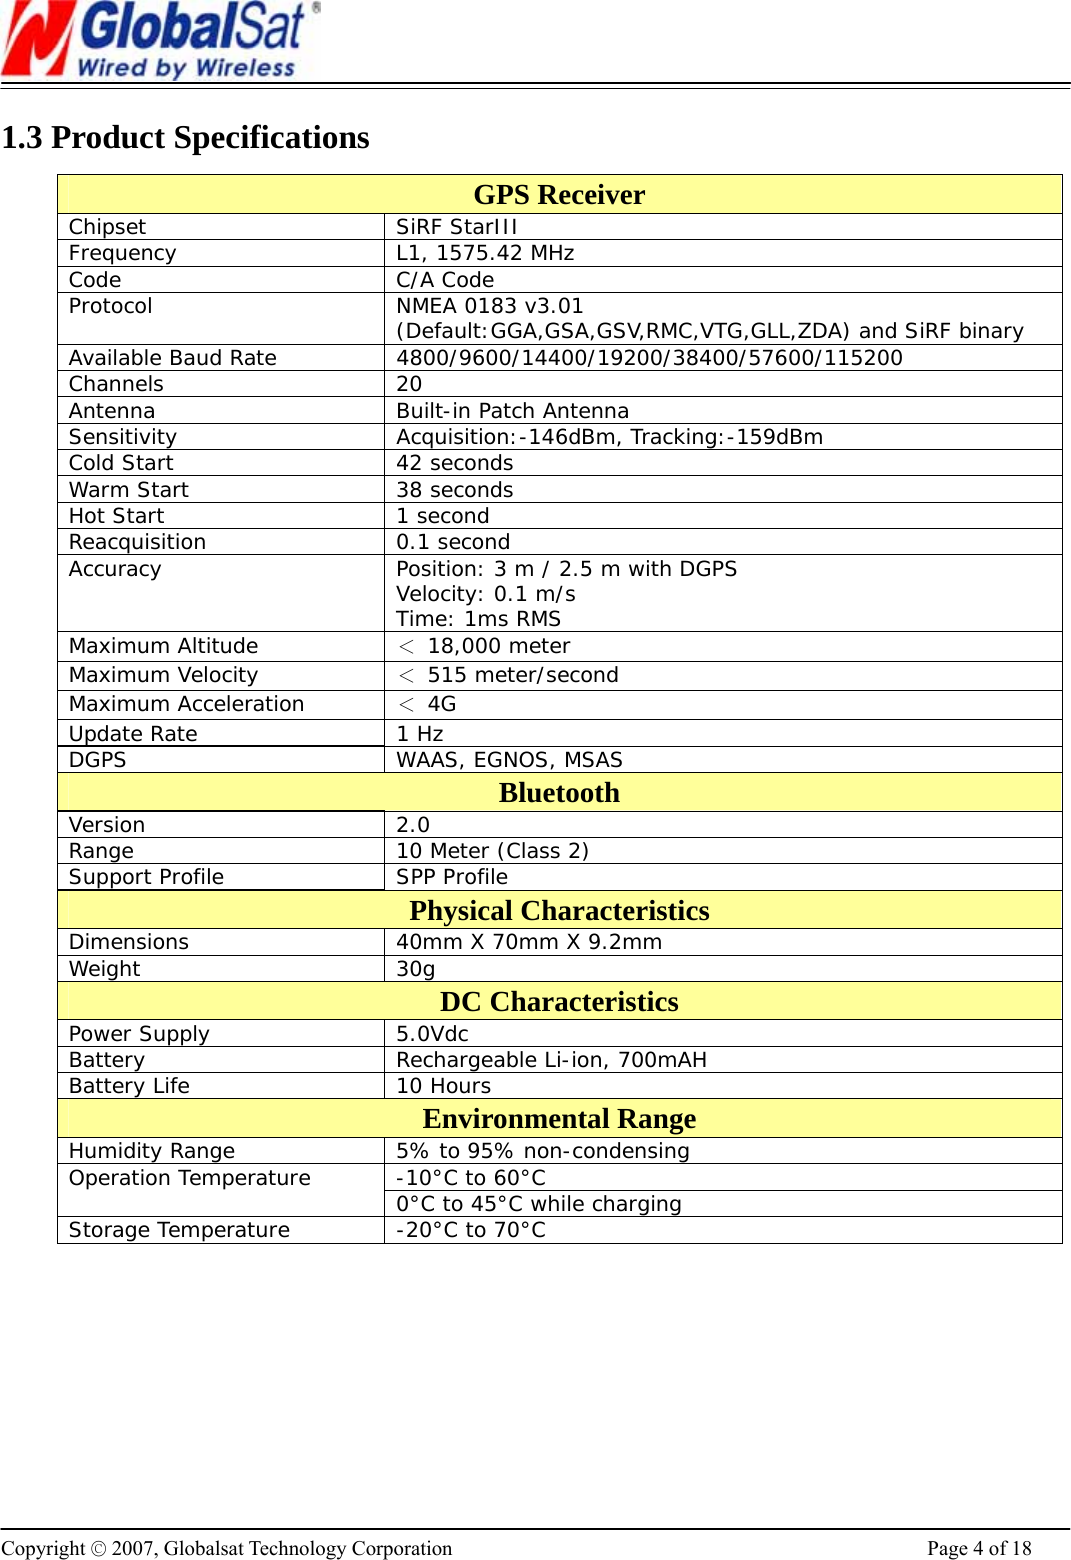                                                                      Copyright © 2007, Globalsat Technology Corporation  Page 4 of 18 1.3 Product Specifications GPS Receiver Chipset SiRF StarIII Frequency  L1, 1575.42 MHz Code C/A Code Protocol  NMEA 0183 v3.01  (Default:GGA,GSA,GSV,RMC,VTG,GLL,ZDA) and SiRF binary Available Baud Rate  4800/9600/14400/19200/38400/57600/115200  Channels 20 Antenna  Built-in Patch Antenna Sensitivity Acquisition:-146dBm, Tracking:-159dBm Cold Start  42 seconds Warm Start  38 seconds Hot Start  1 second Reacquisition 0.1 second Accuracy  Position: 3 m / 2.5 m with DGPS  Velocity: 0.1 m/s  Time: 1ms RMS Maximum Altitude  ＜ 18,000 meter Maximum Velocity  ＜ 515 meter/second Maximum Acceleration  ＜ 4G Update Rate  1 Hz DGPS  WAAS, EGNOS, MSAS Bluetooth Version 2.0 Range  10 Meter (Class 2) Support Profile  SPP Profile Physical Characteristics Dimensions  40mm X 70mm X 9.2mm Weight 30g DC Characteristics Power Supply  5.0Vdc Battery   Rechargeable Li-ion, 700mAH Battery Life  10 Hours Environmental Range Humidity Range  5% to 95% non-condensing -10°C to 60°C Operation Temperature  0°C to 45°C while charging Storage Temperature  -20°C to 70°C  